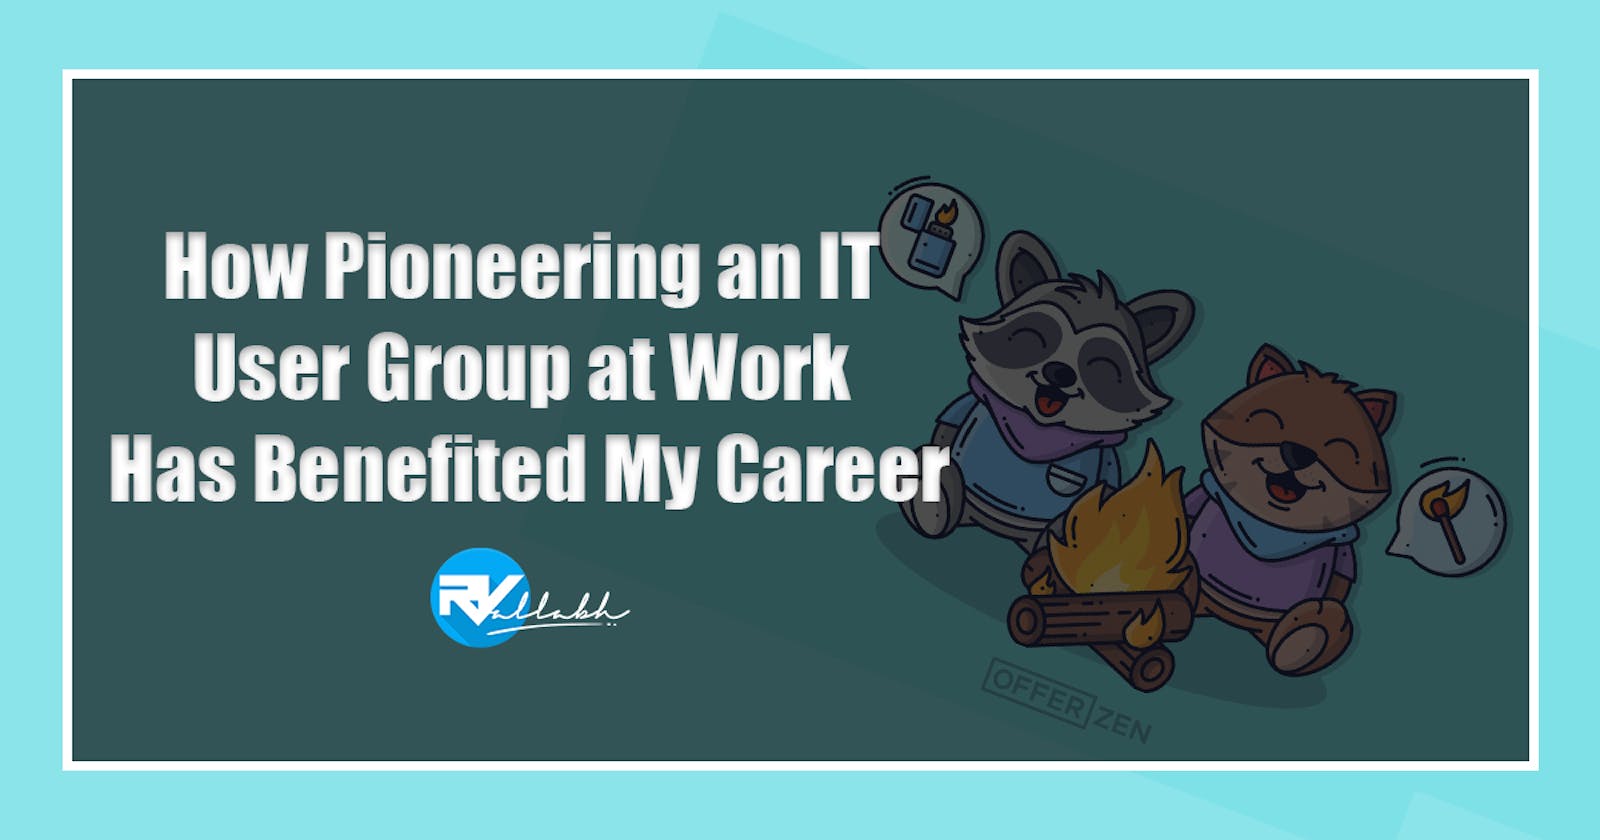 How Pioneering an IT User Group at Work Has Benefited My Career